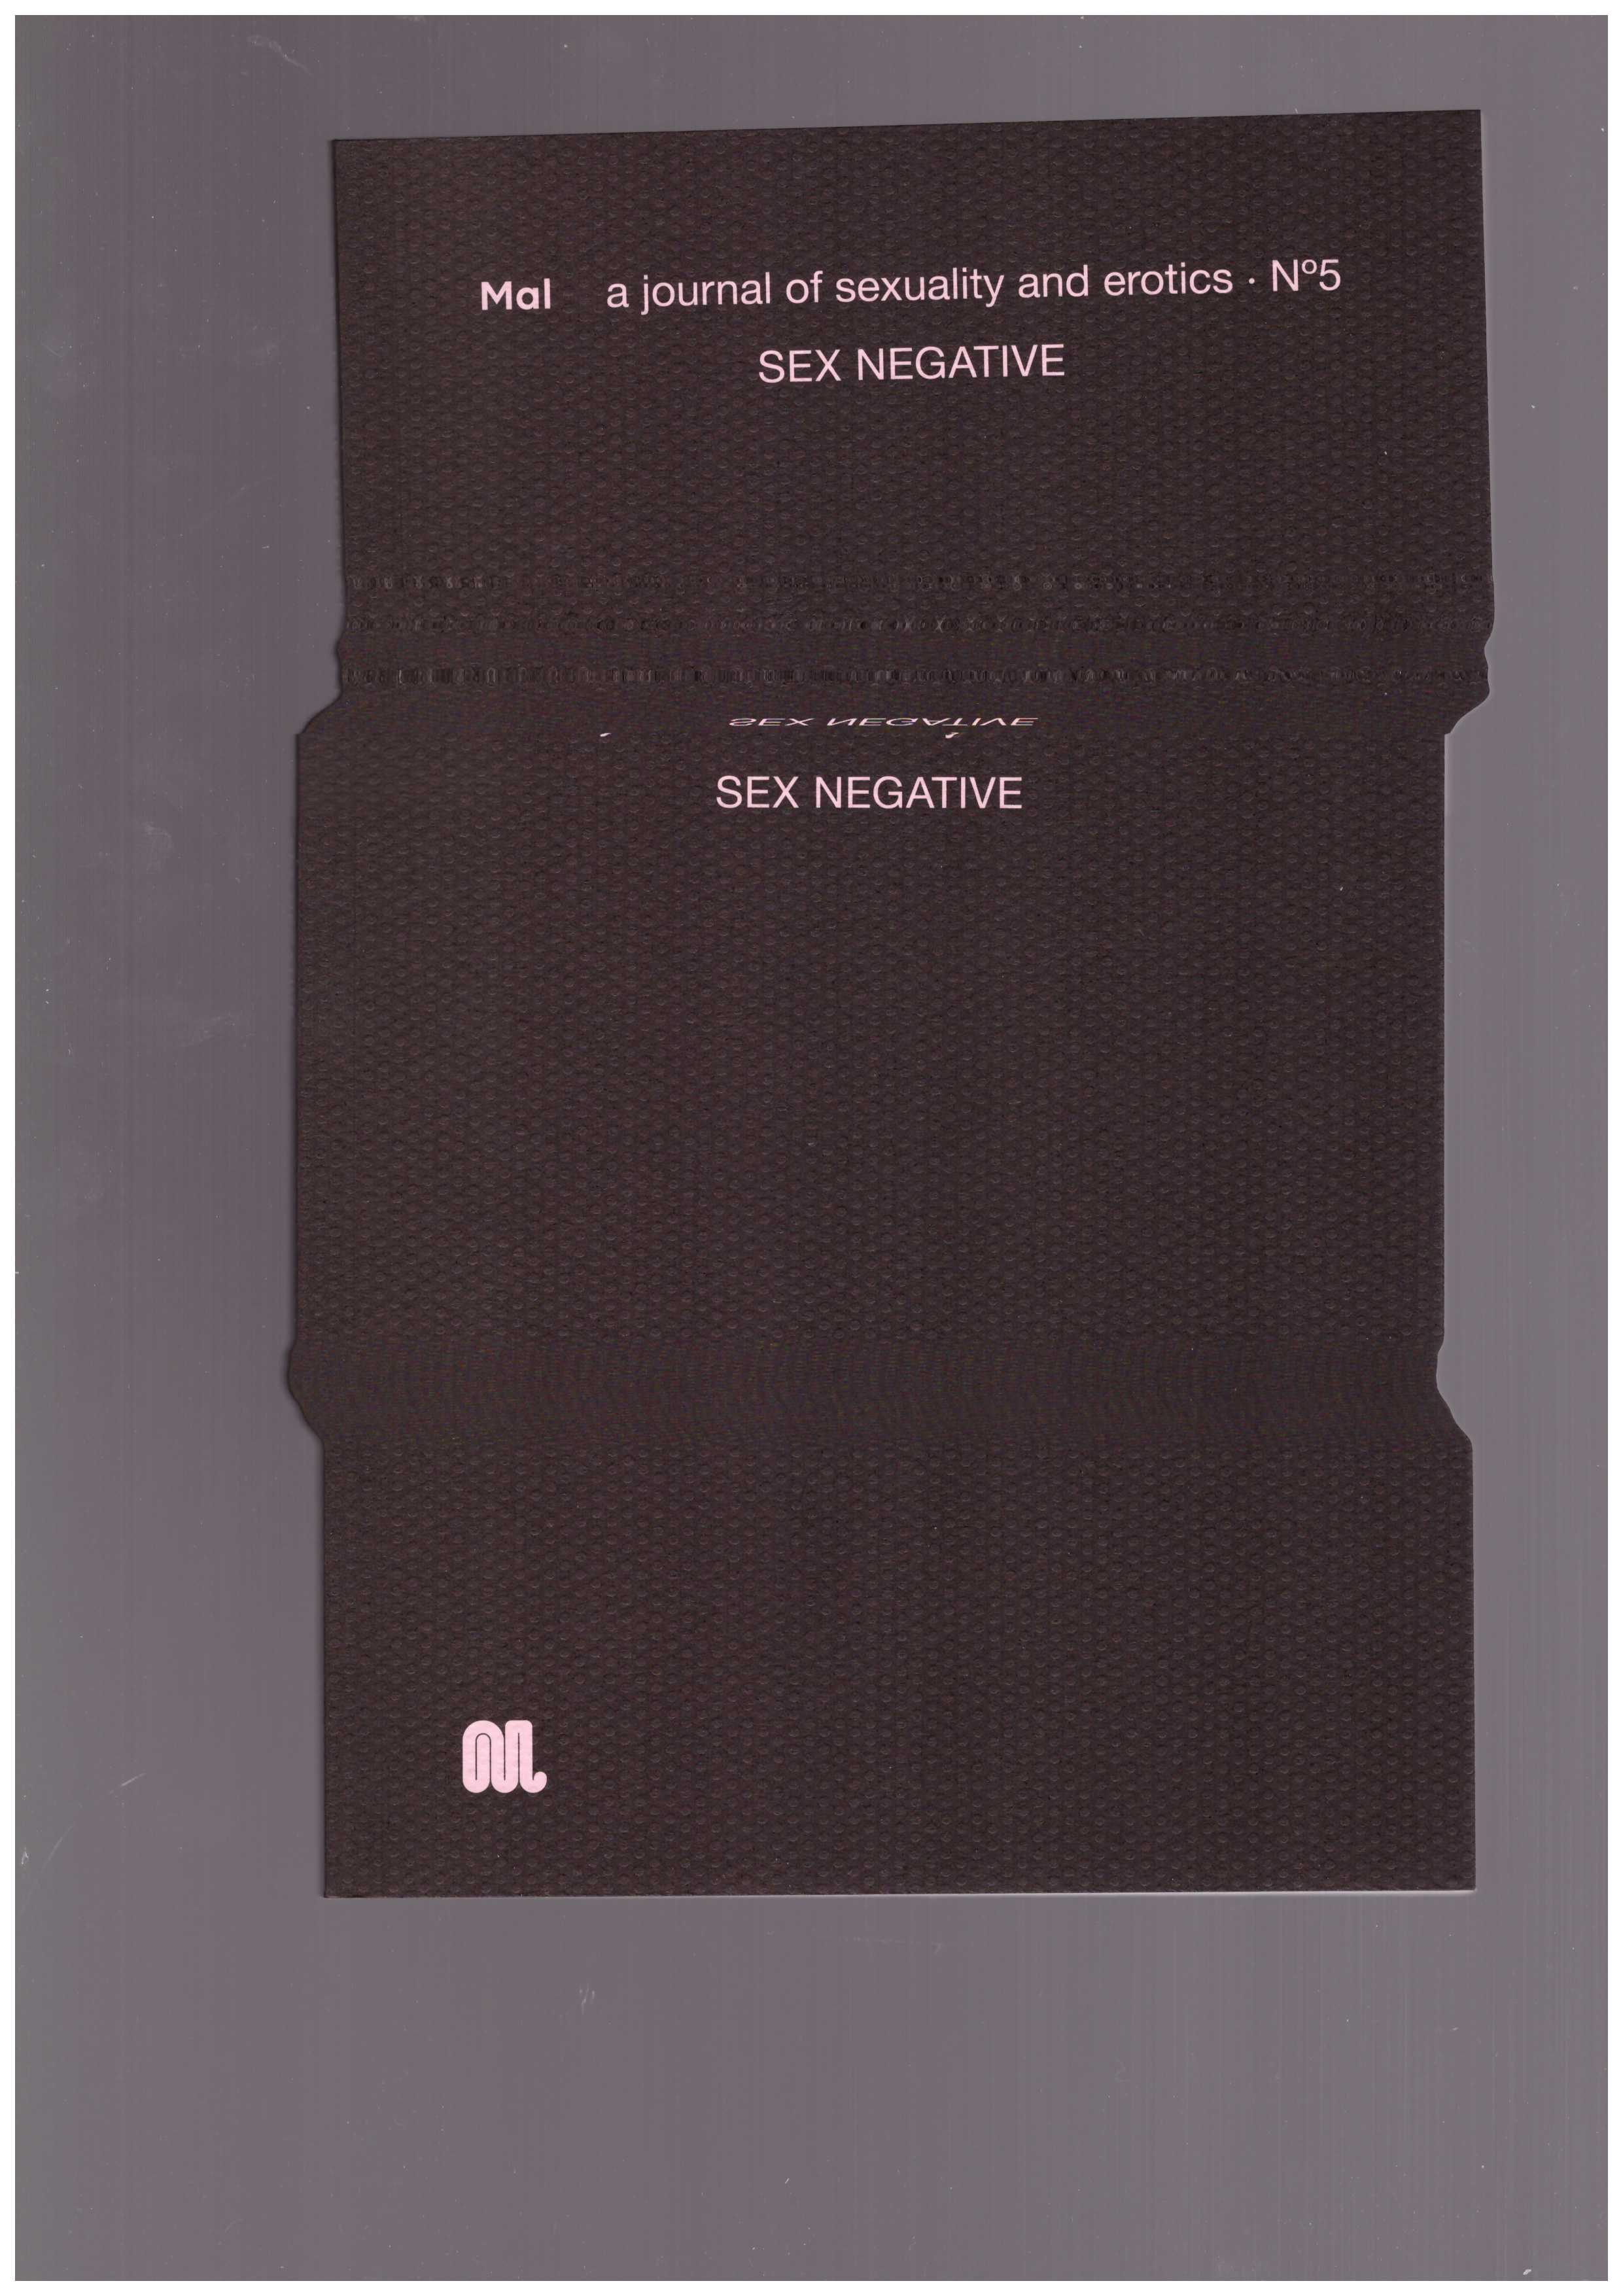 DIMITROVA, Maria (ed.) - Mal, a journal of sexuality and erotics. N°5 — Sex Negative — August, 2020